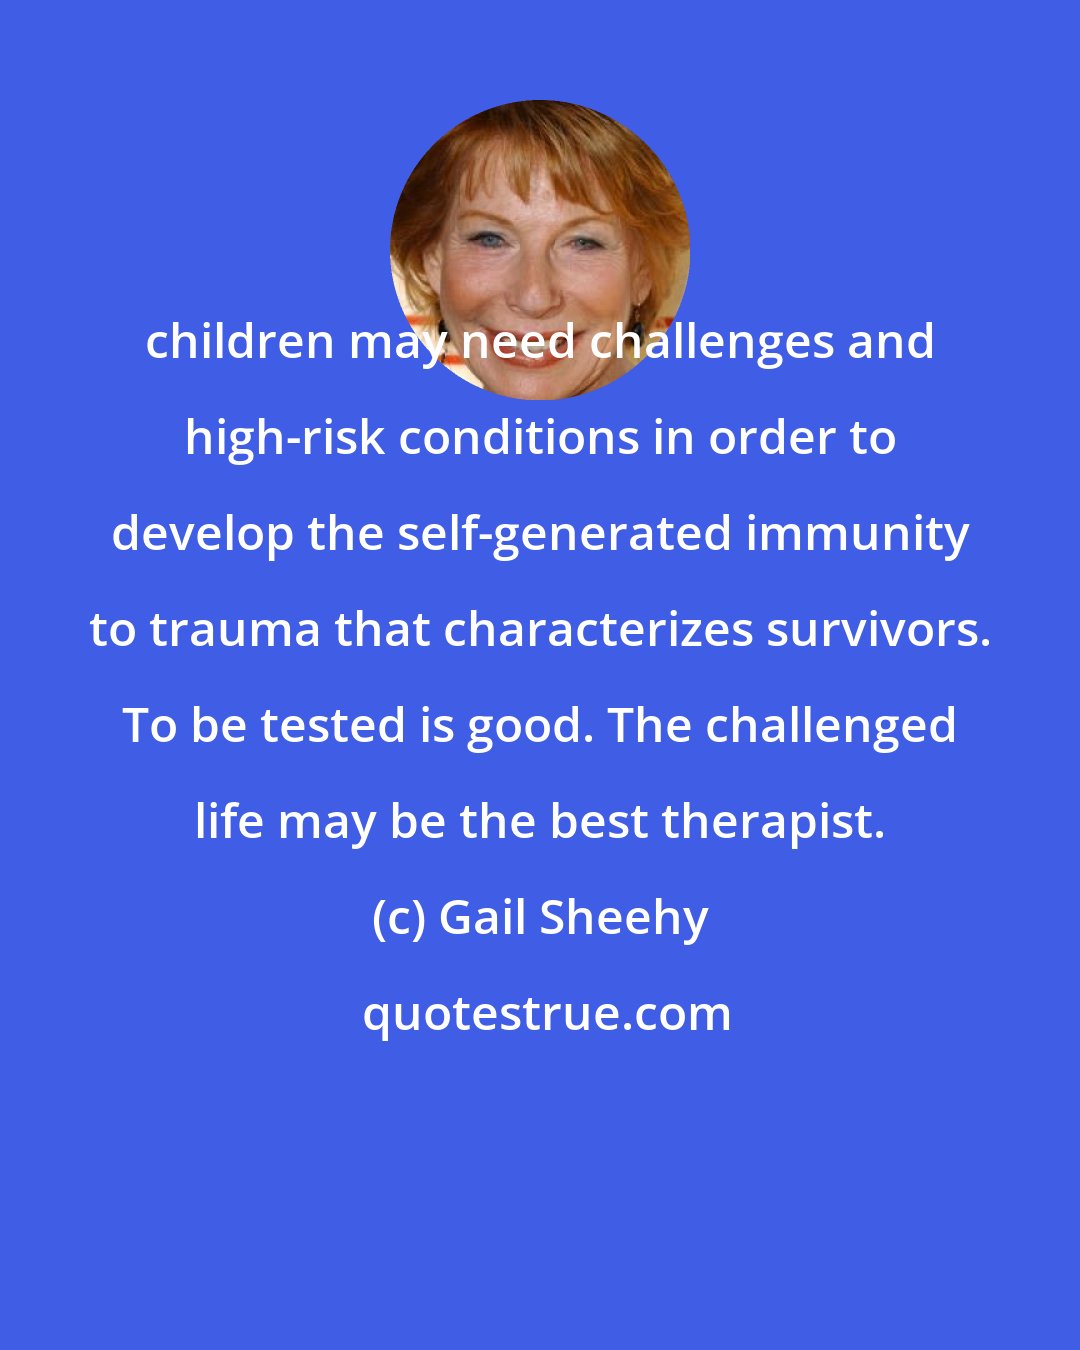 Gail Sheehy: children may need challenges and high-risk conditions in order to develop the self-generated immunity to trauma that characterizes survivors. To be tested is good. The challenged life may be the best therapist.